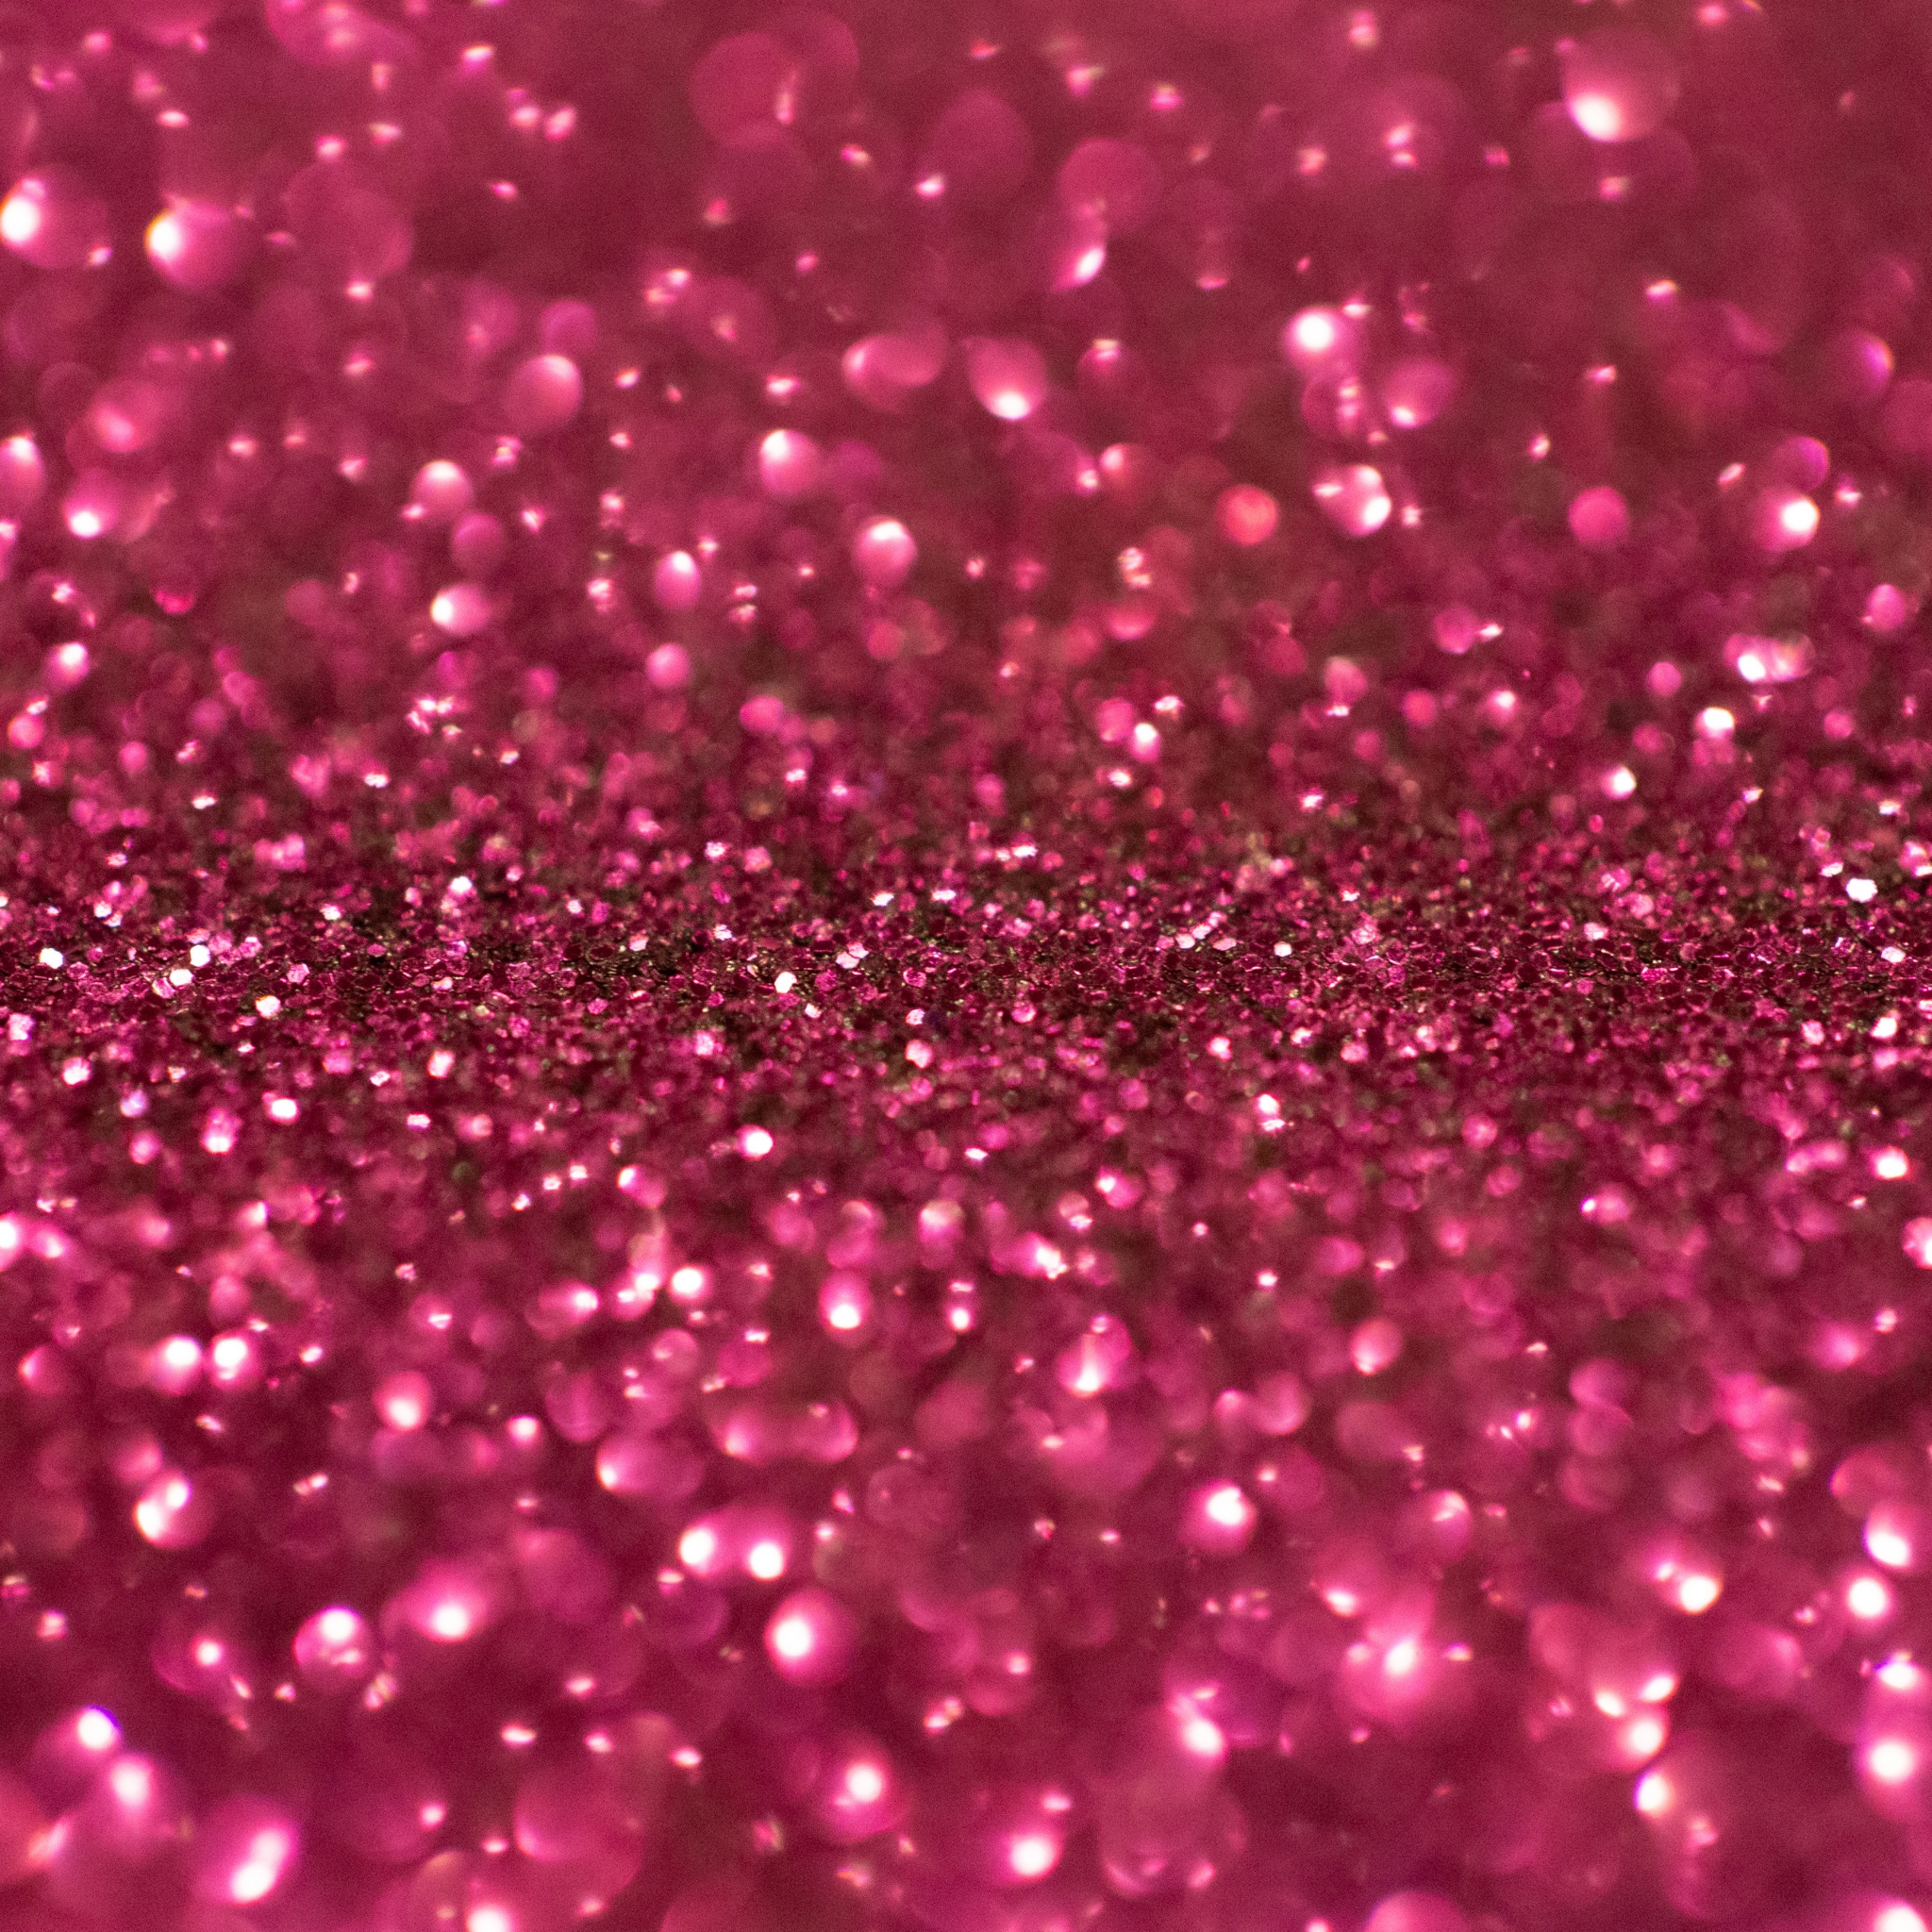 Pictures Of Pink Sparkles